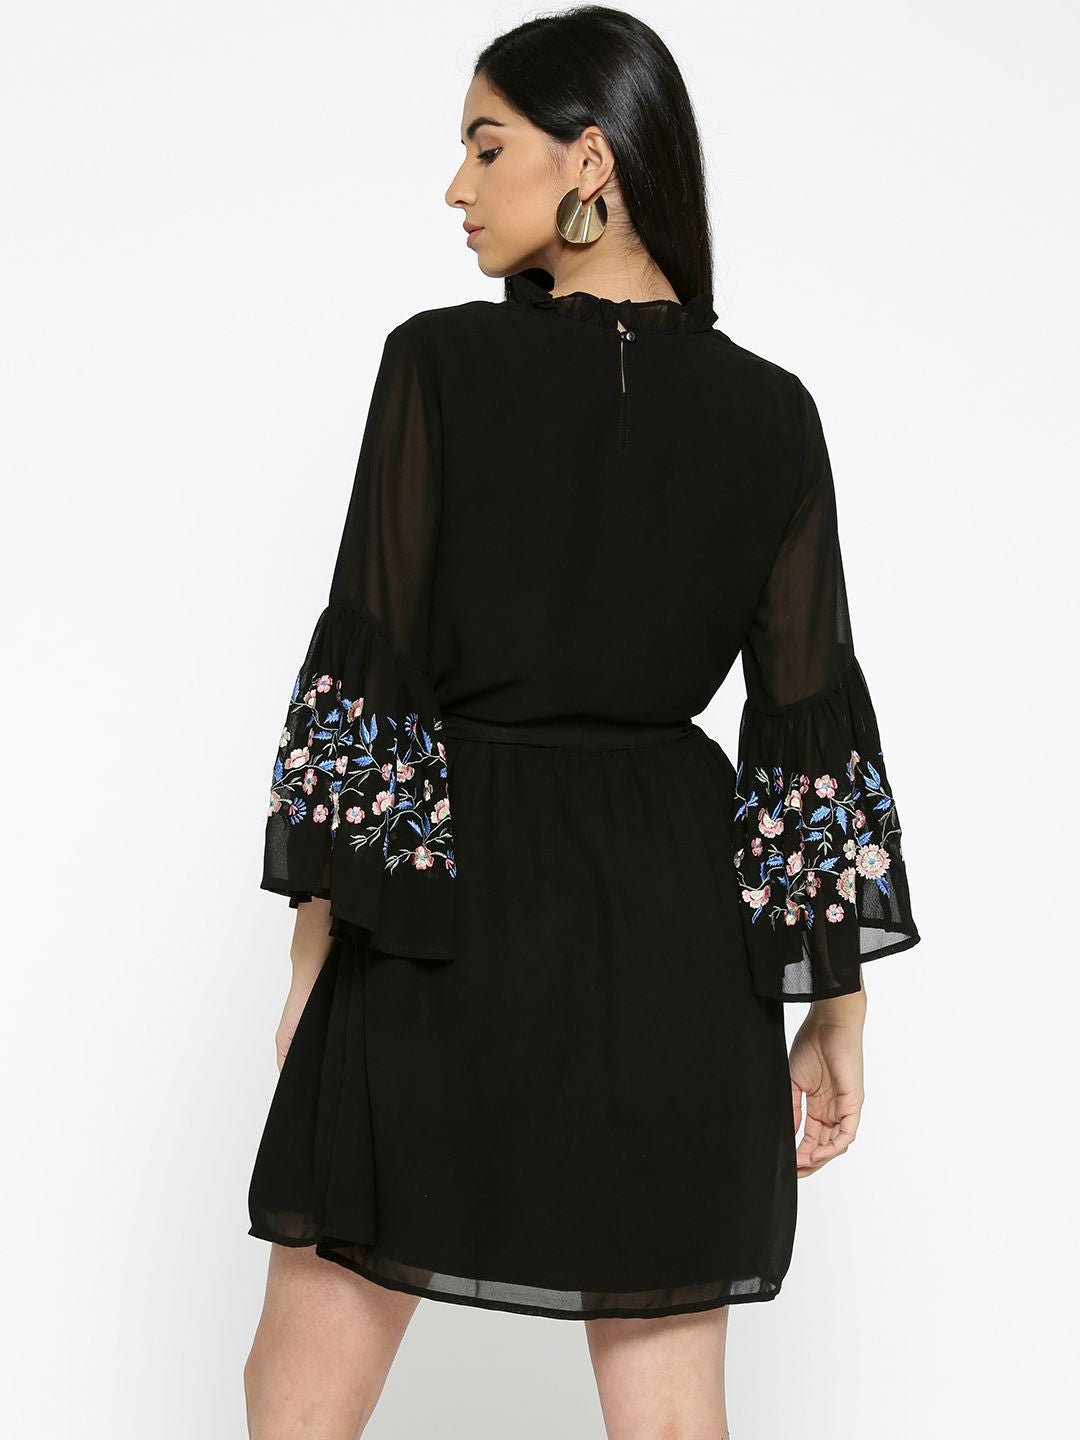 Embroidered Bell Sleeves Dress